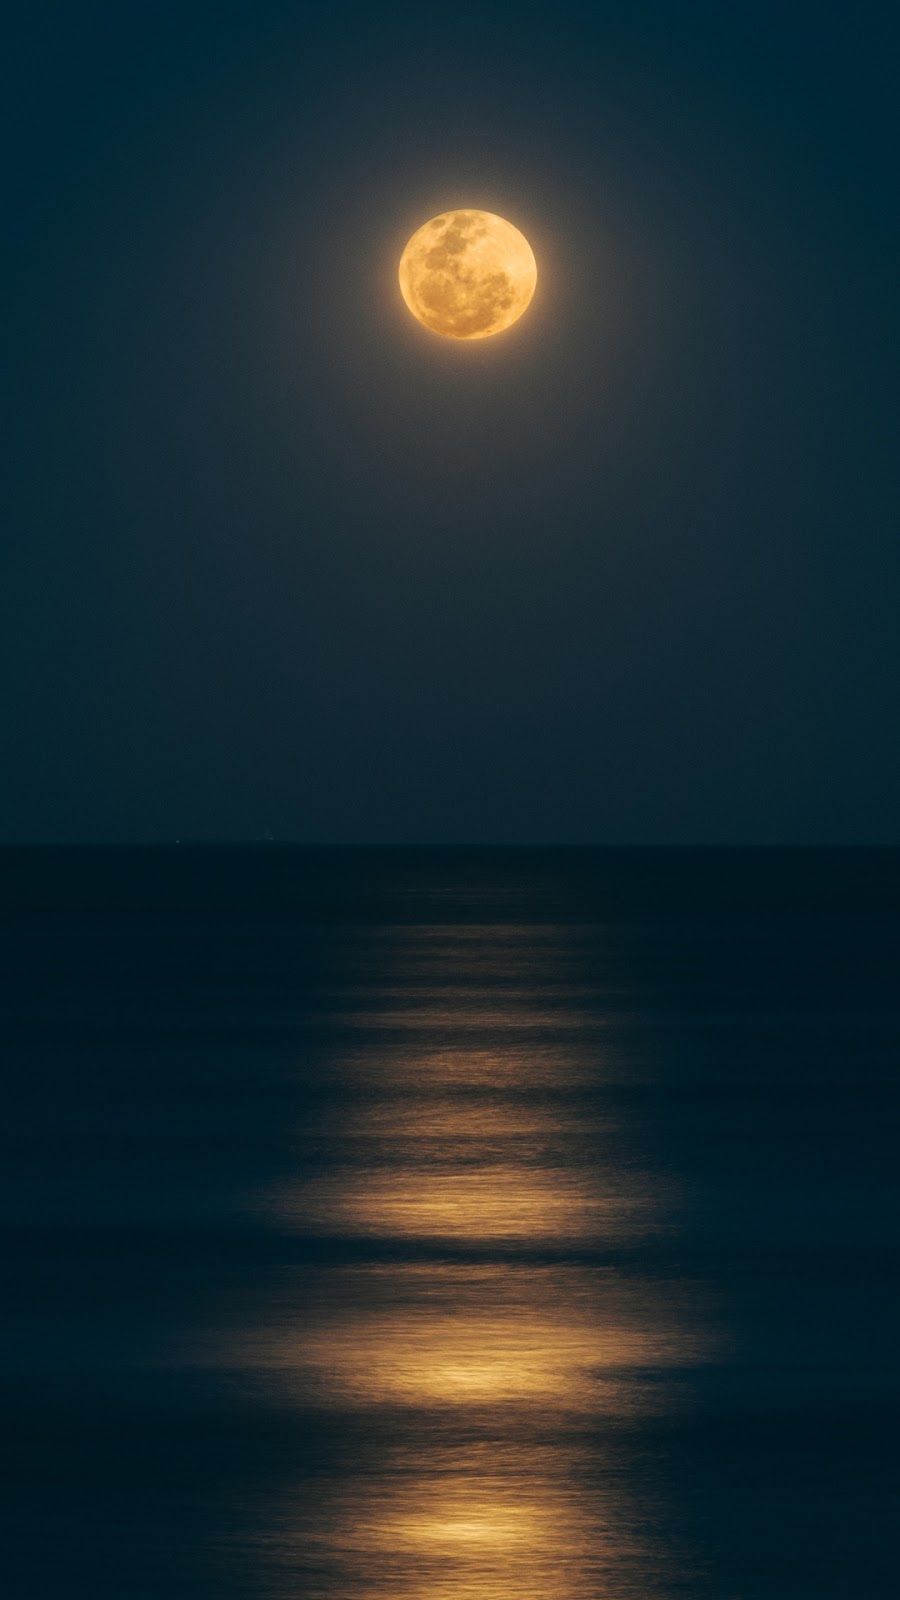 Full moon. Photographing the moon, Moon picture, Full moon picture